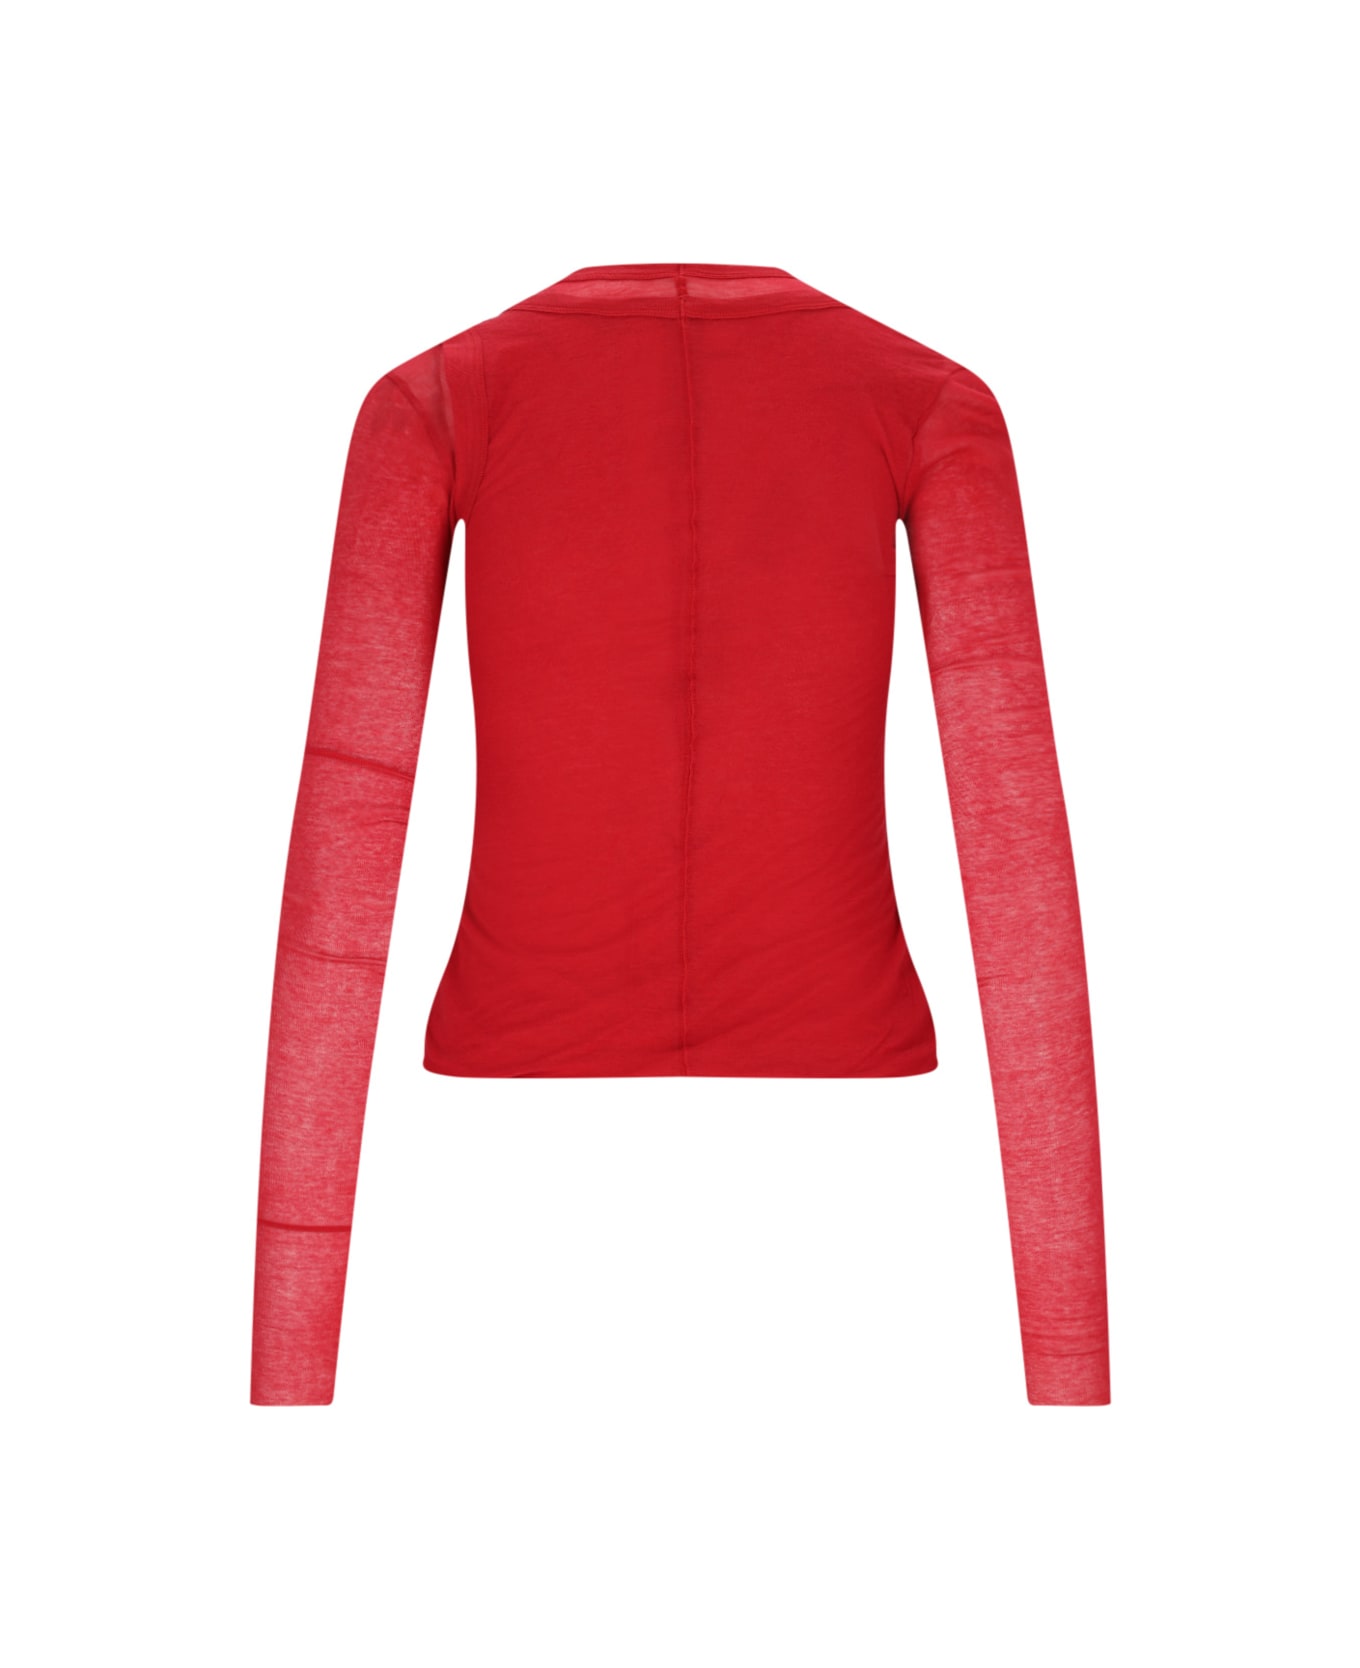 Rick Owens Top - Red トップス